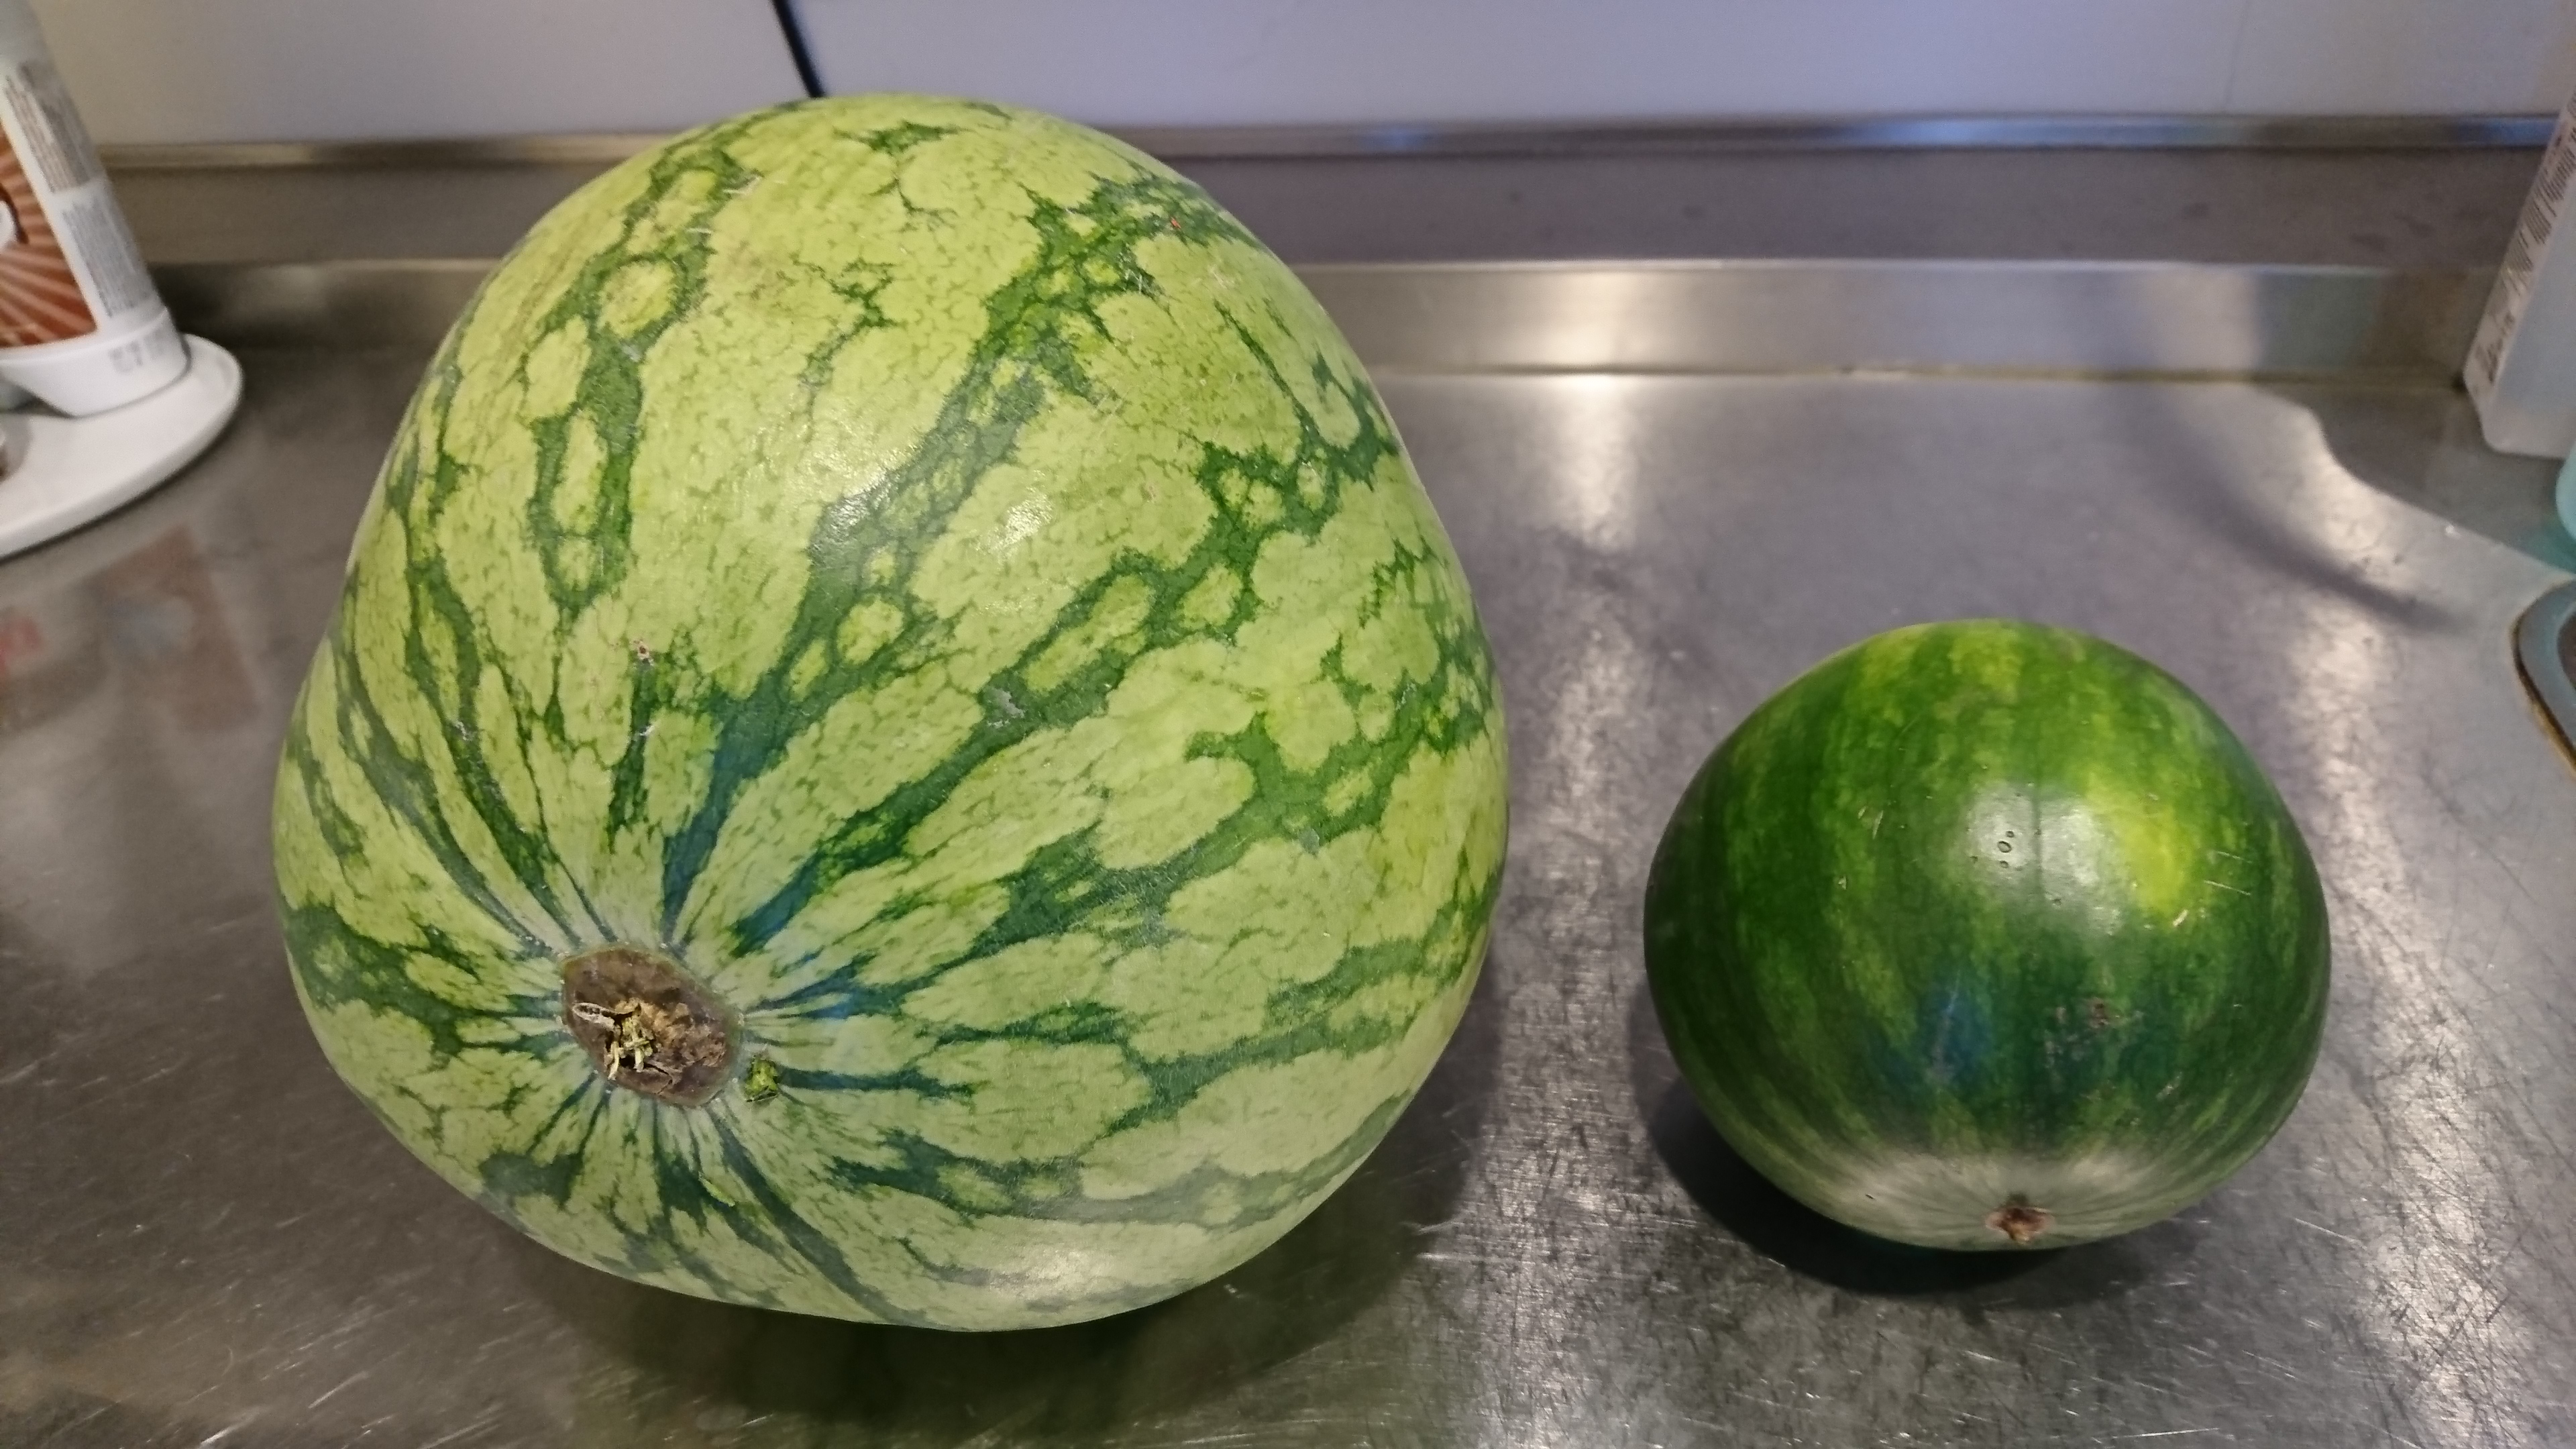 Regular sized Watermelon for scale.